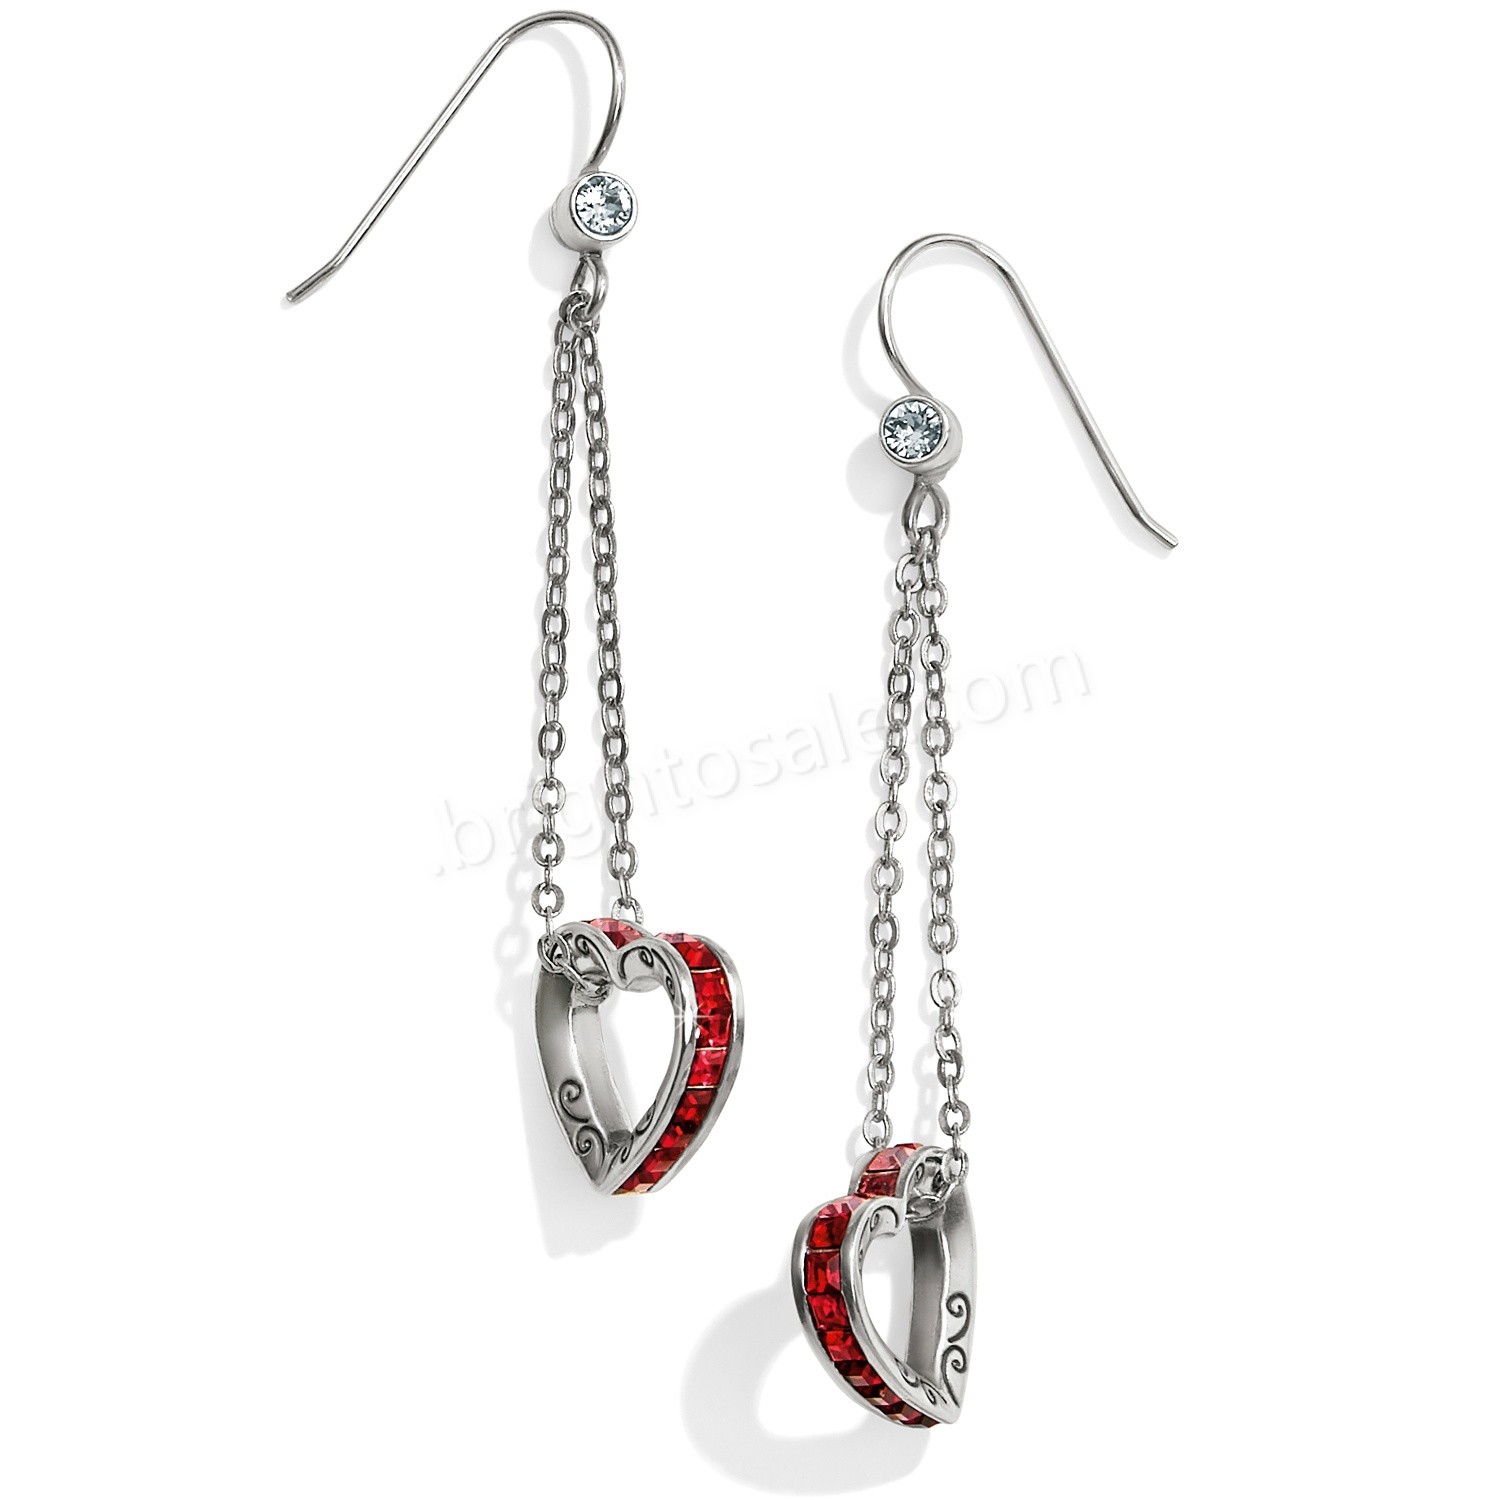 Brighton Collectibles & Online Discount Twinkle Post Drop Long Earrings - Brighton Collectibles & Online Discount Twinkle Post Drop Long Earrings